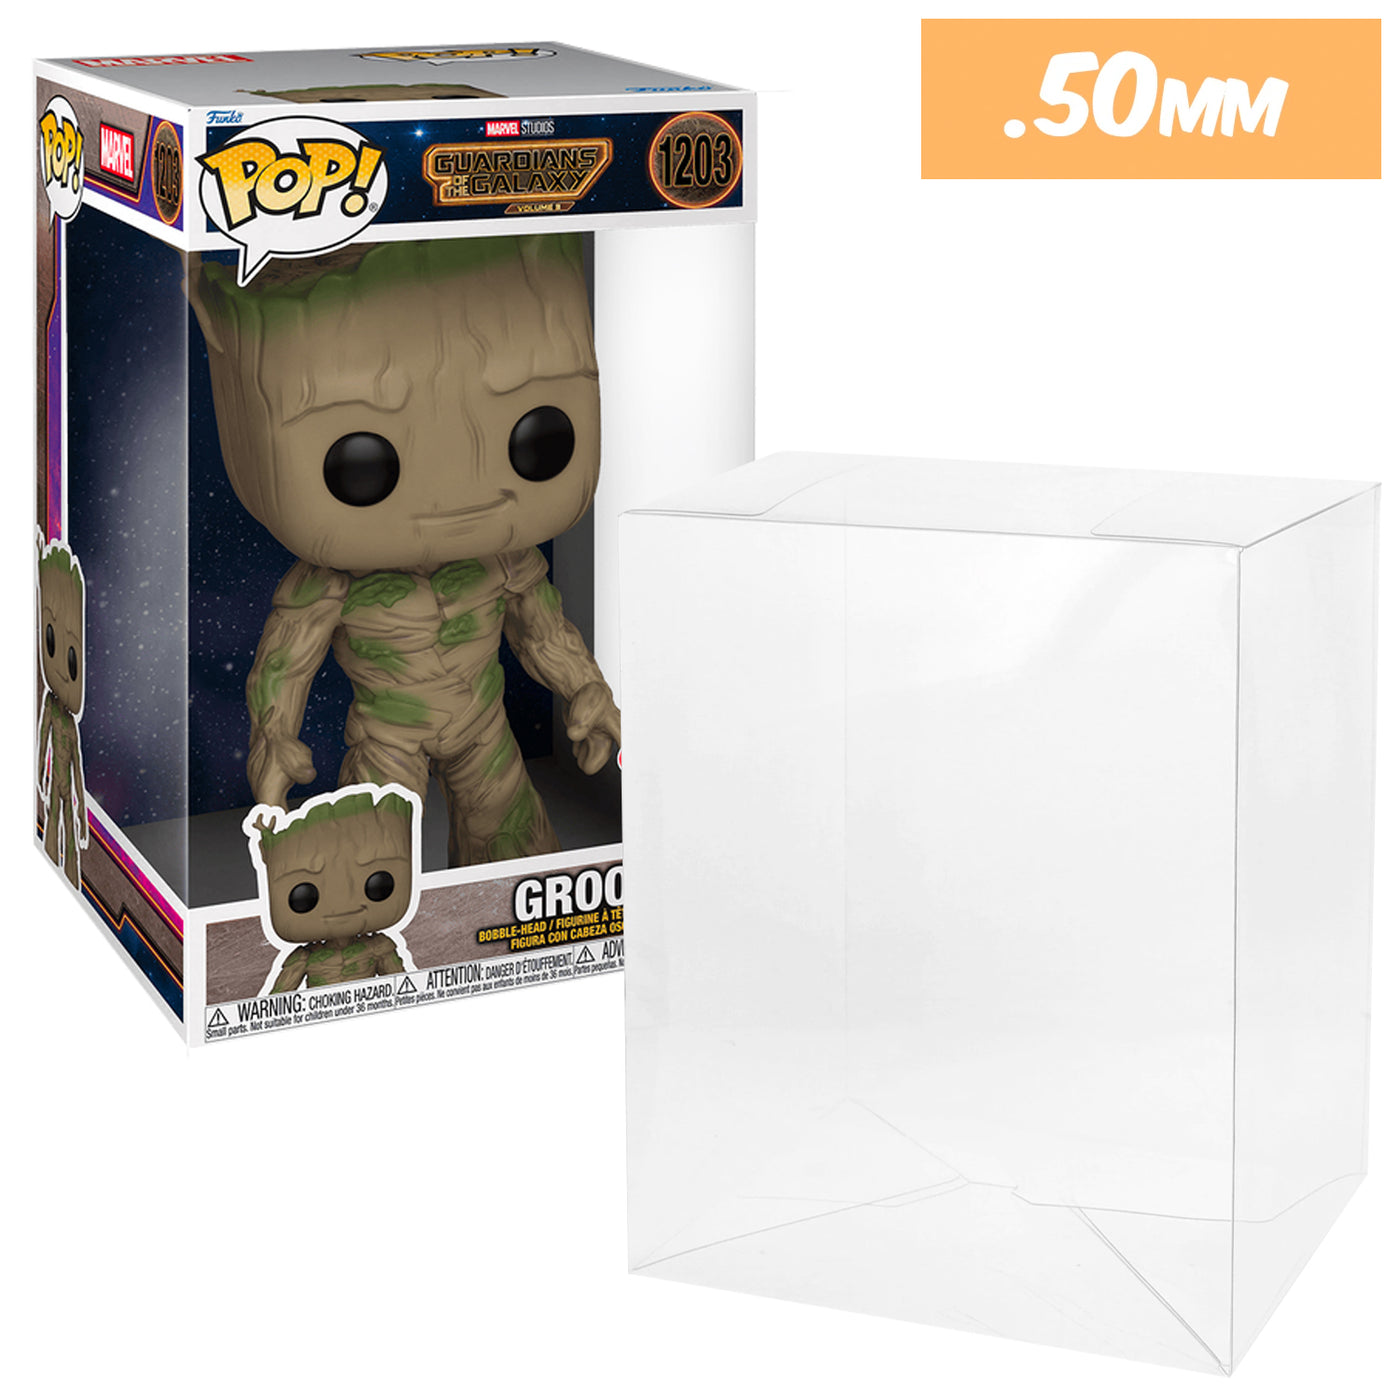 10 inch new size groot best funko pop protectors thick strong uv scratch flat top stack vinyl display geek plastic shield vaulted eco armor fits collect protect display case kollector protector